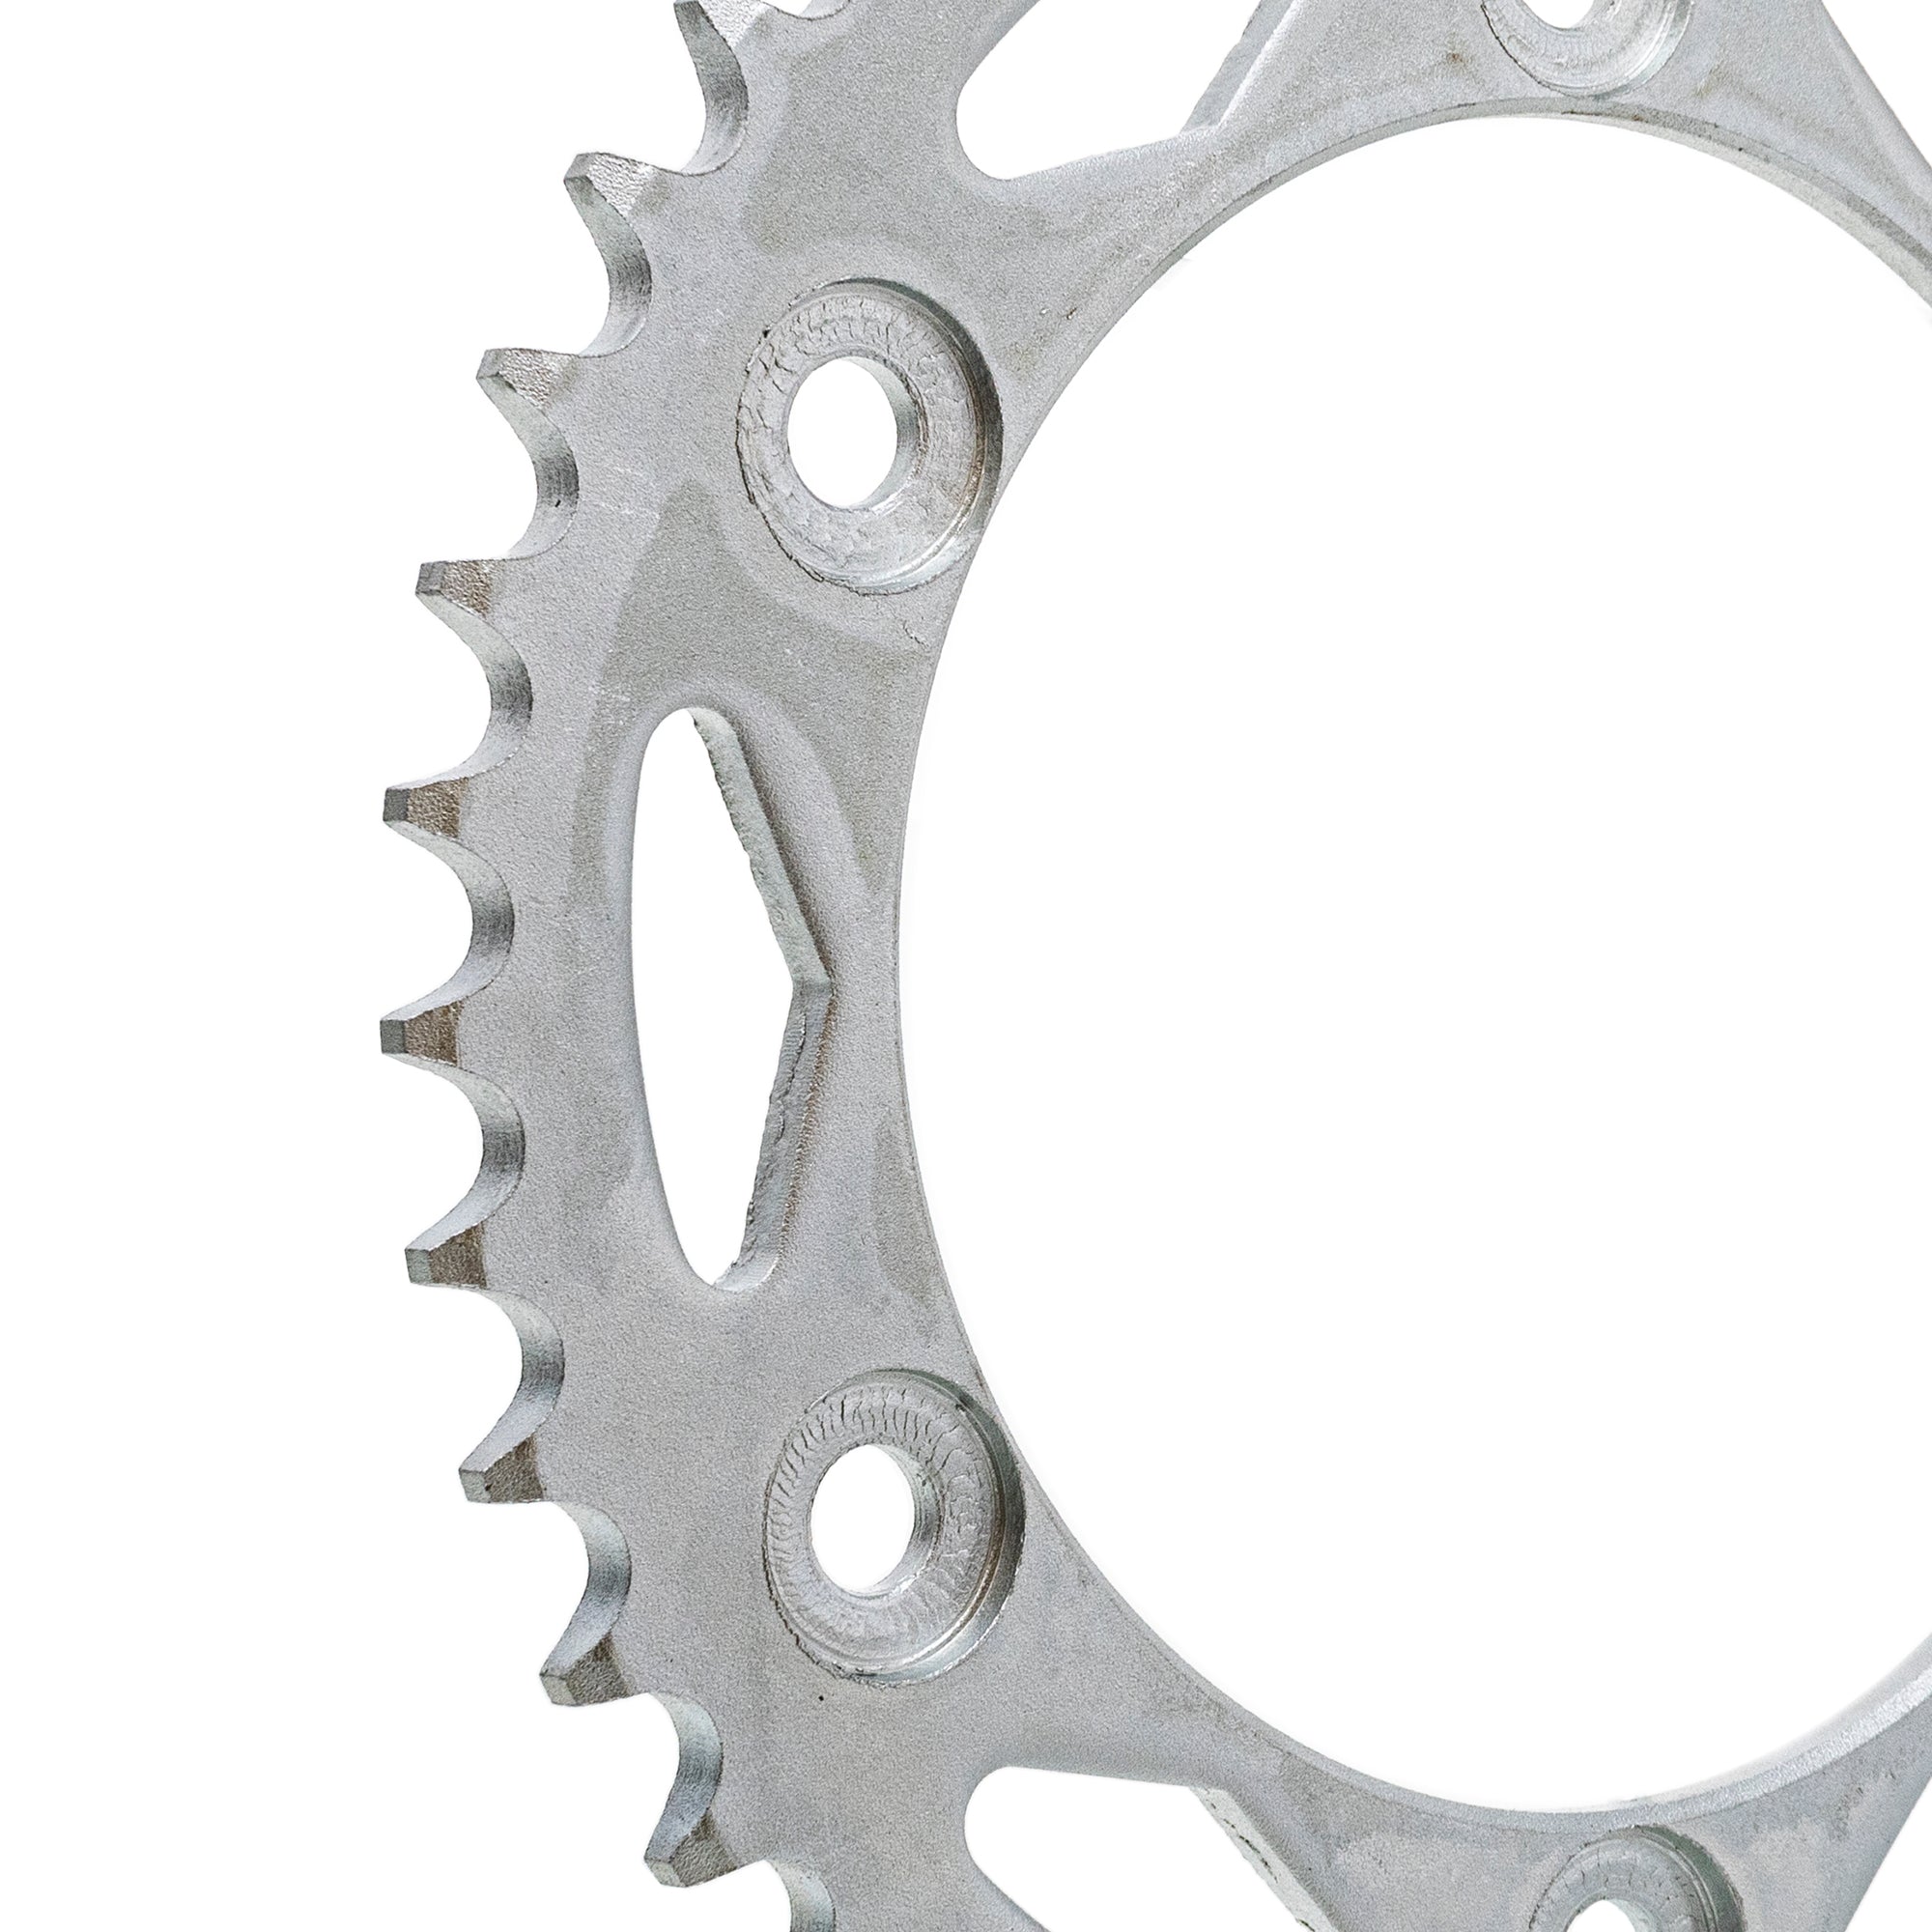 520 Pitch 42 Tooth Rear Drive Sprocket for Honda CBR1000RR Chain